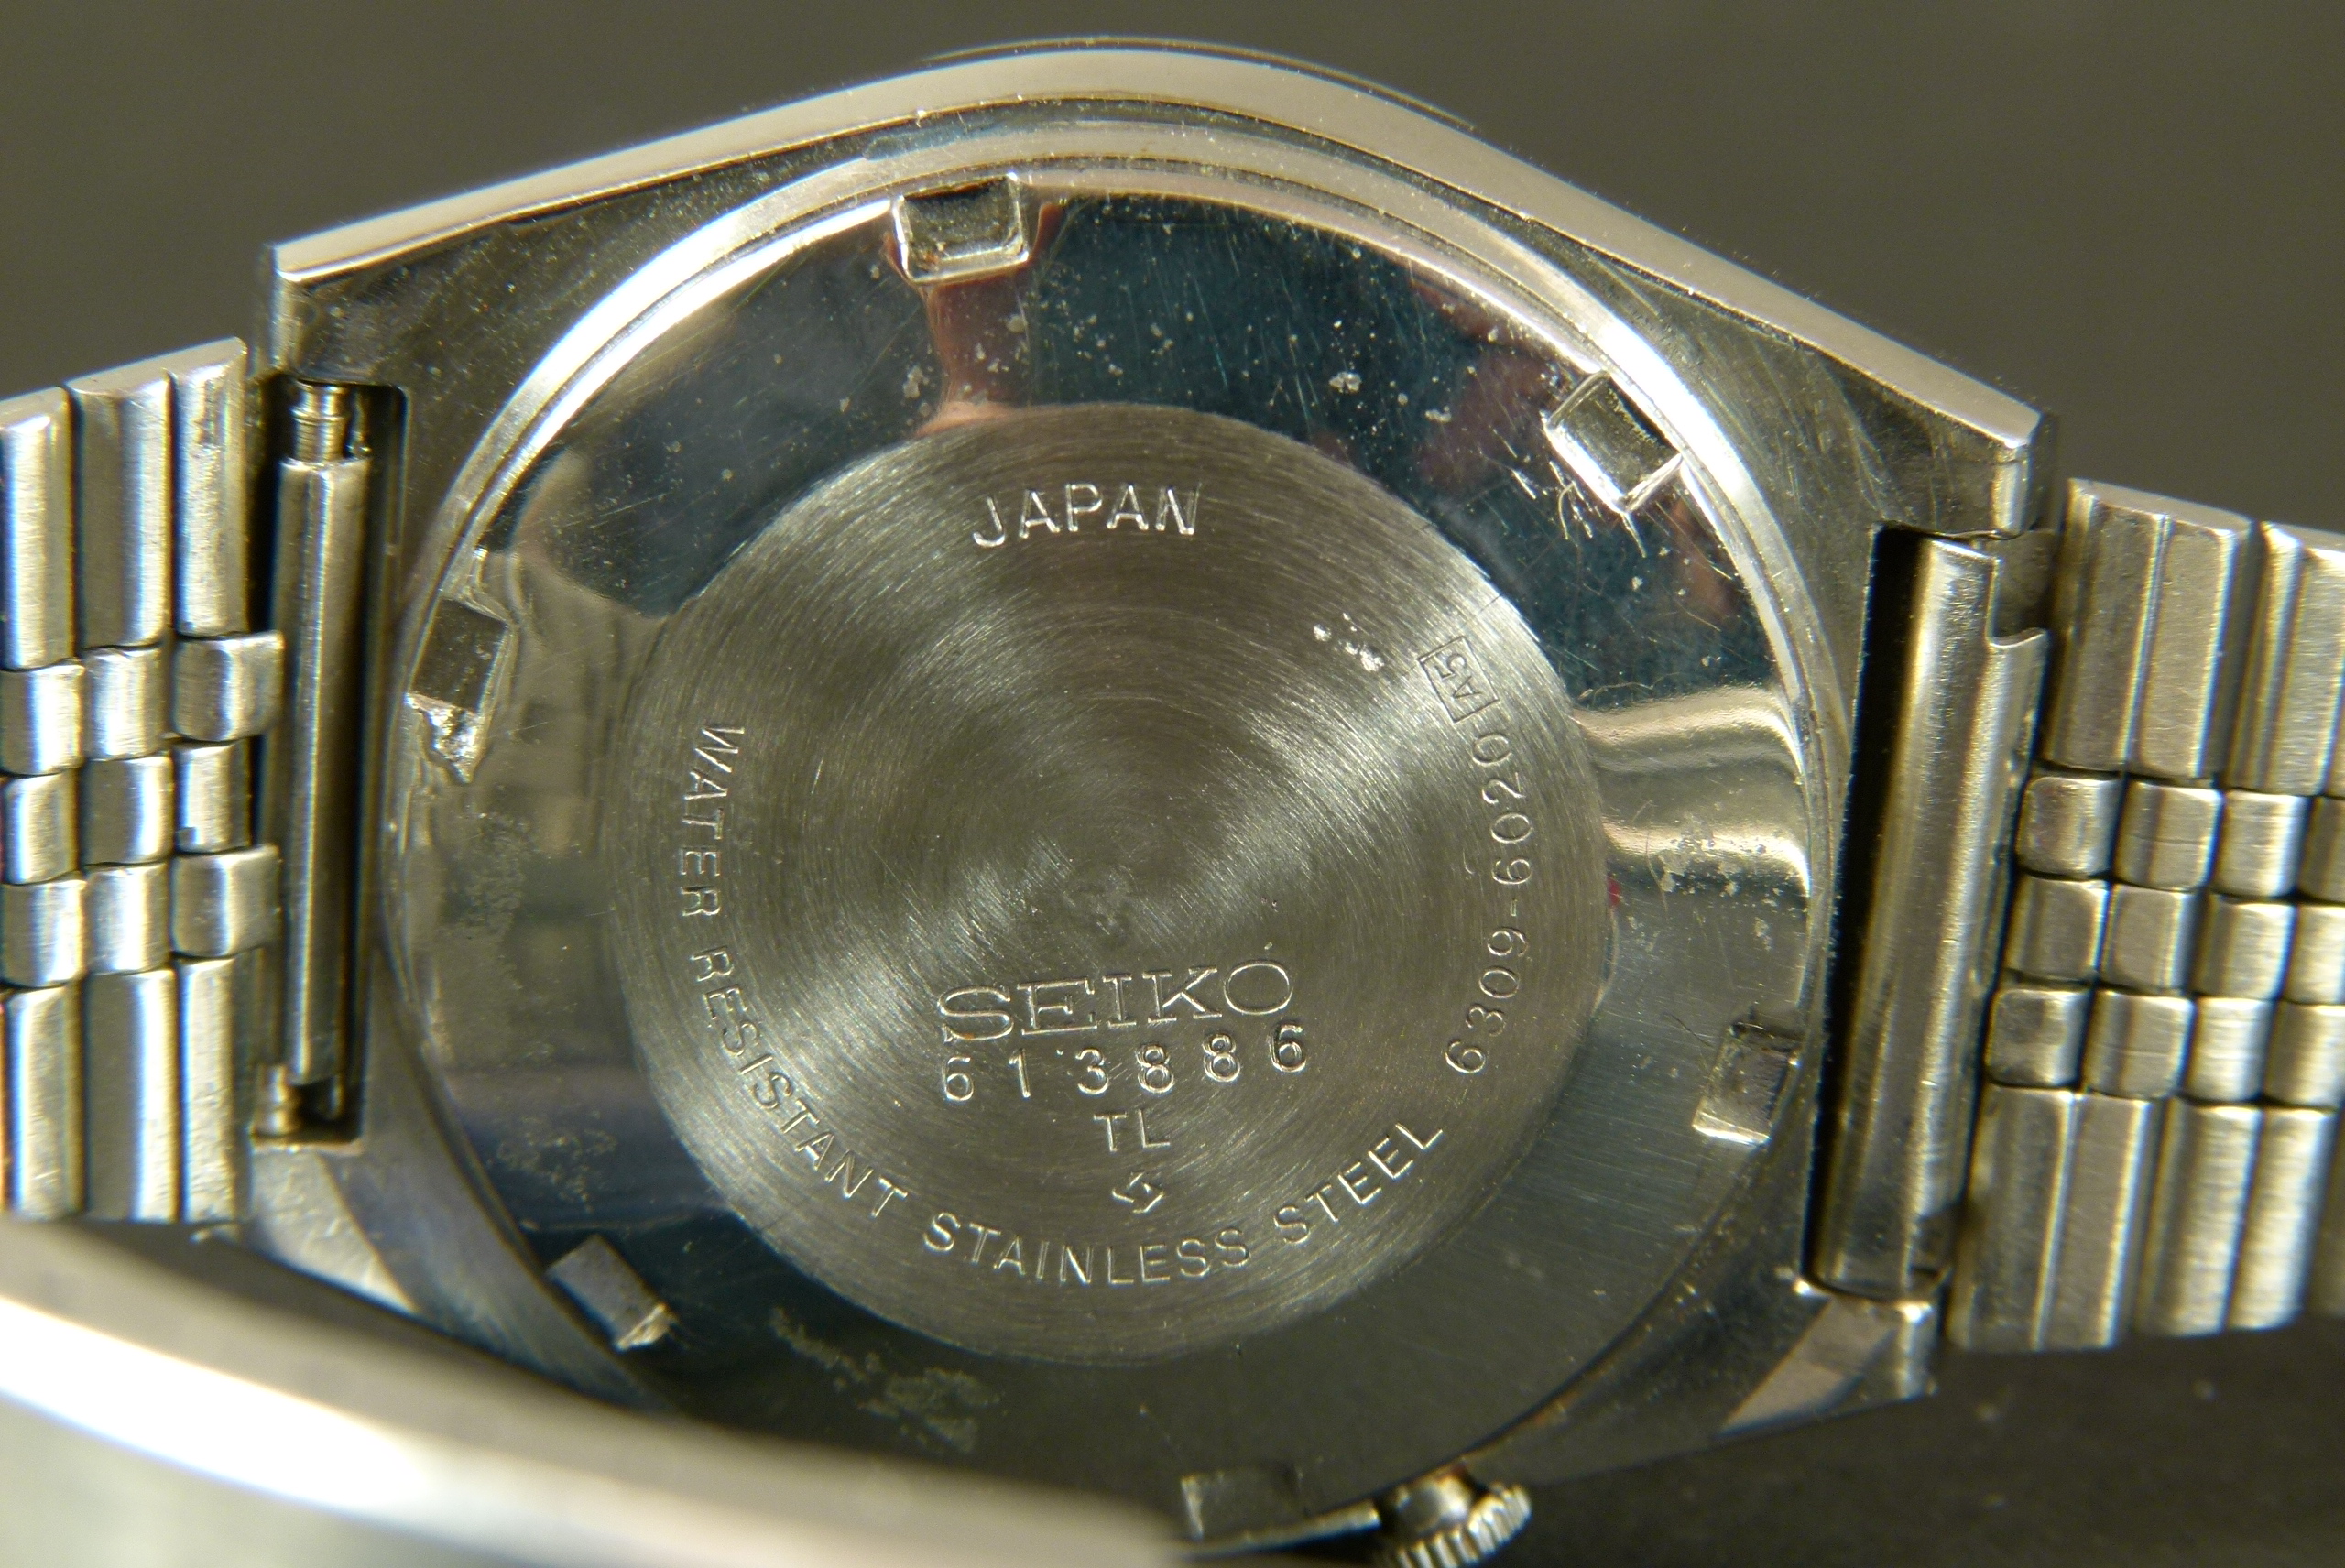 Seiko gentleman's automatic 5 day and date wristwatch c1970 in stainless steel case No 613886, - Image 2 of 3